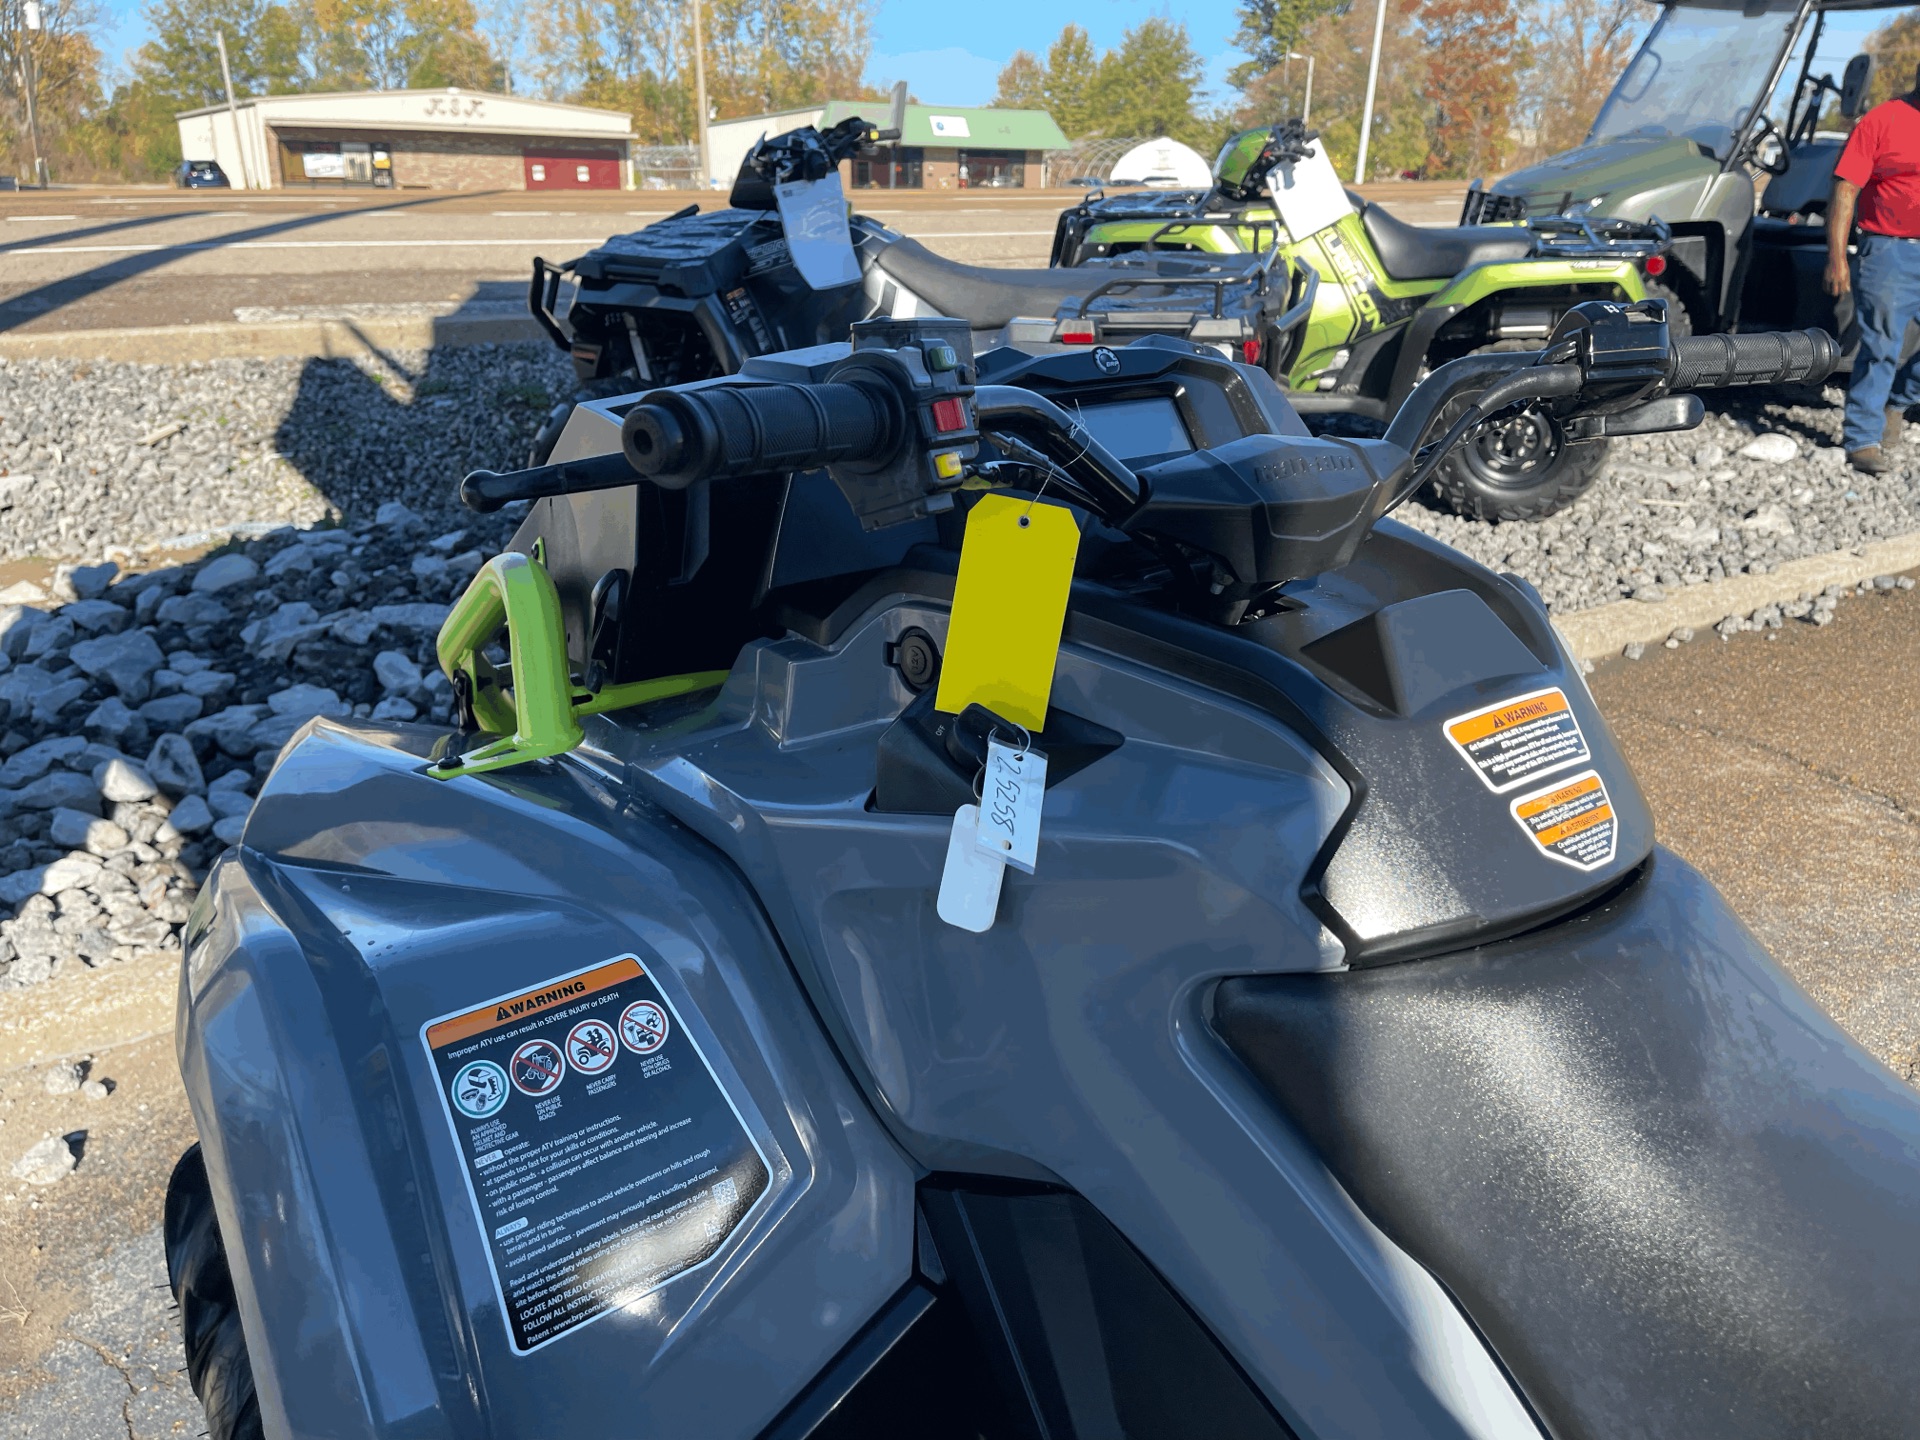 2021 Can-Am Outlander X MR 570 in Dyersburg, Tennessee - Photo 19